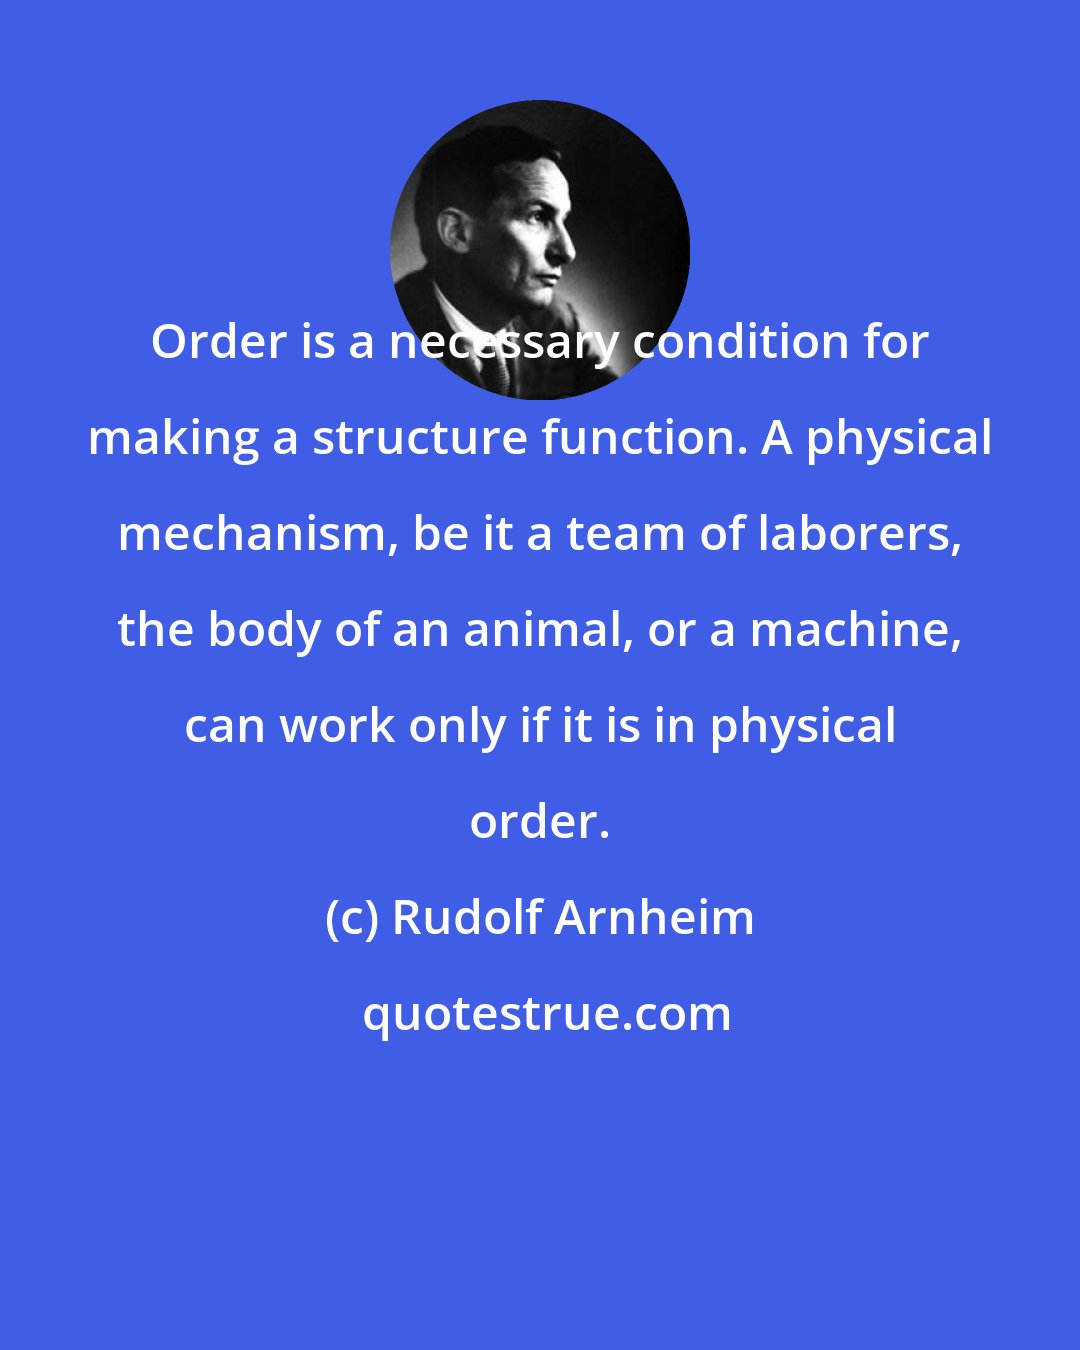 Rudolf Arnheim: Order is a necessary condition for making a structure function. A physical mechanism, be it a team of laborers, the body of an animal, or a machine, can work only if it is in physical order.